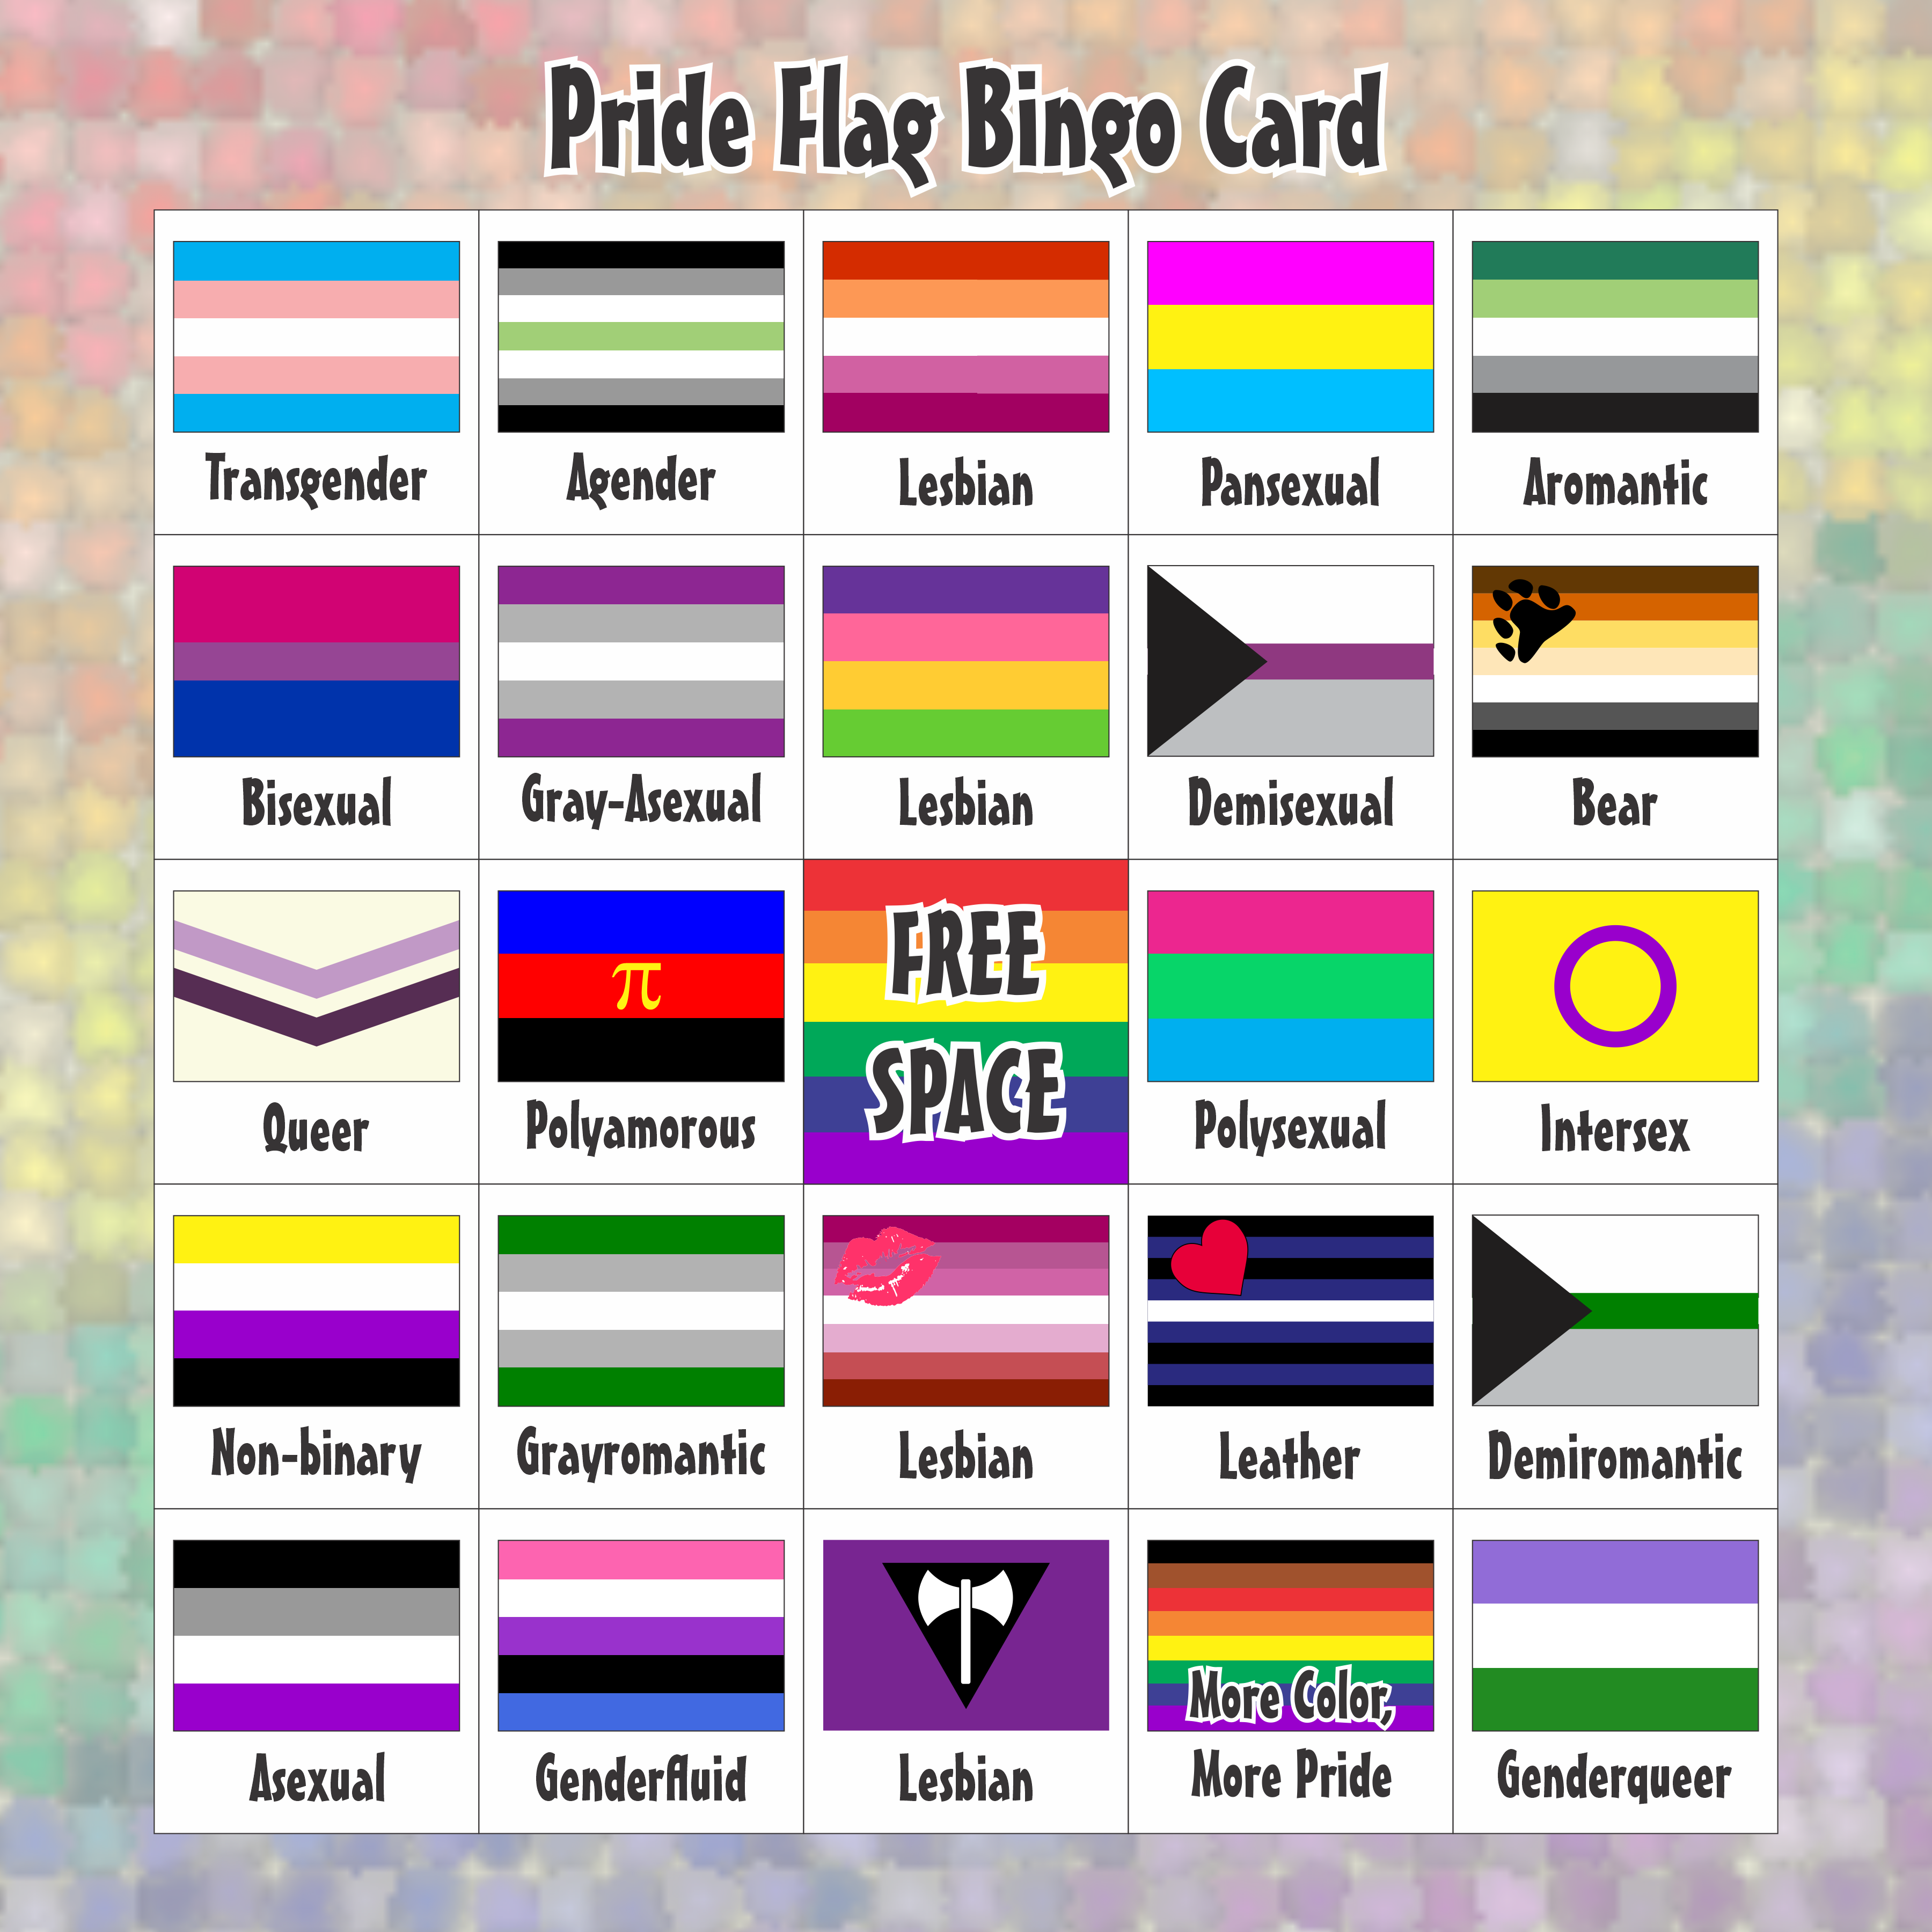 Pride Flag Bingo Card | Asexuality Archive